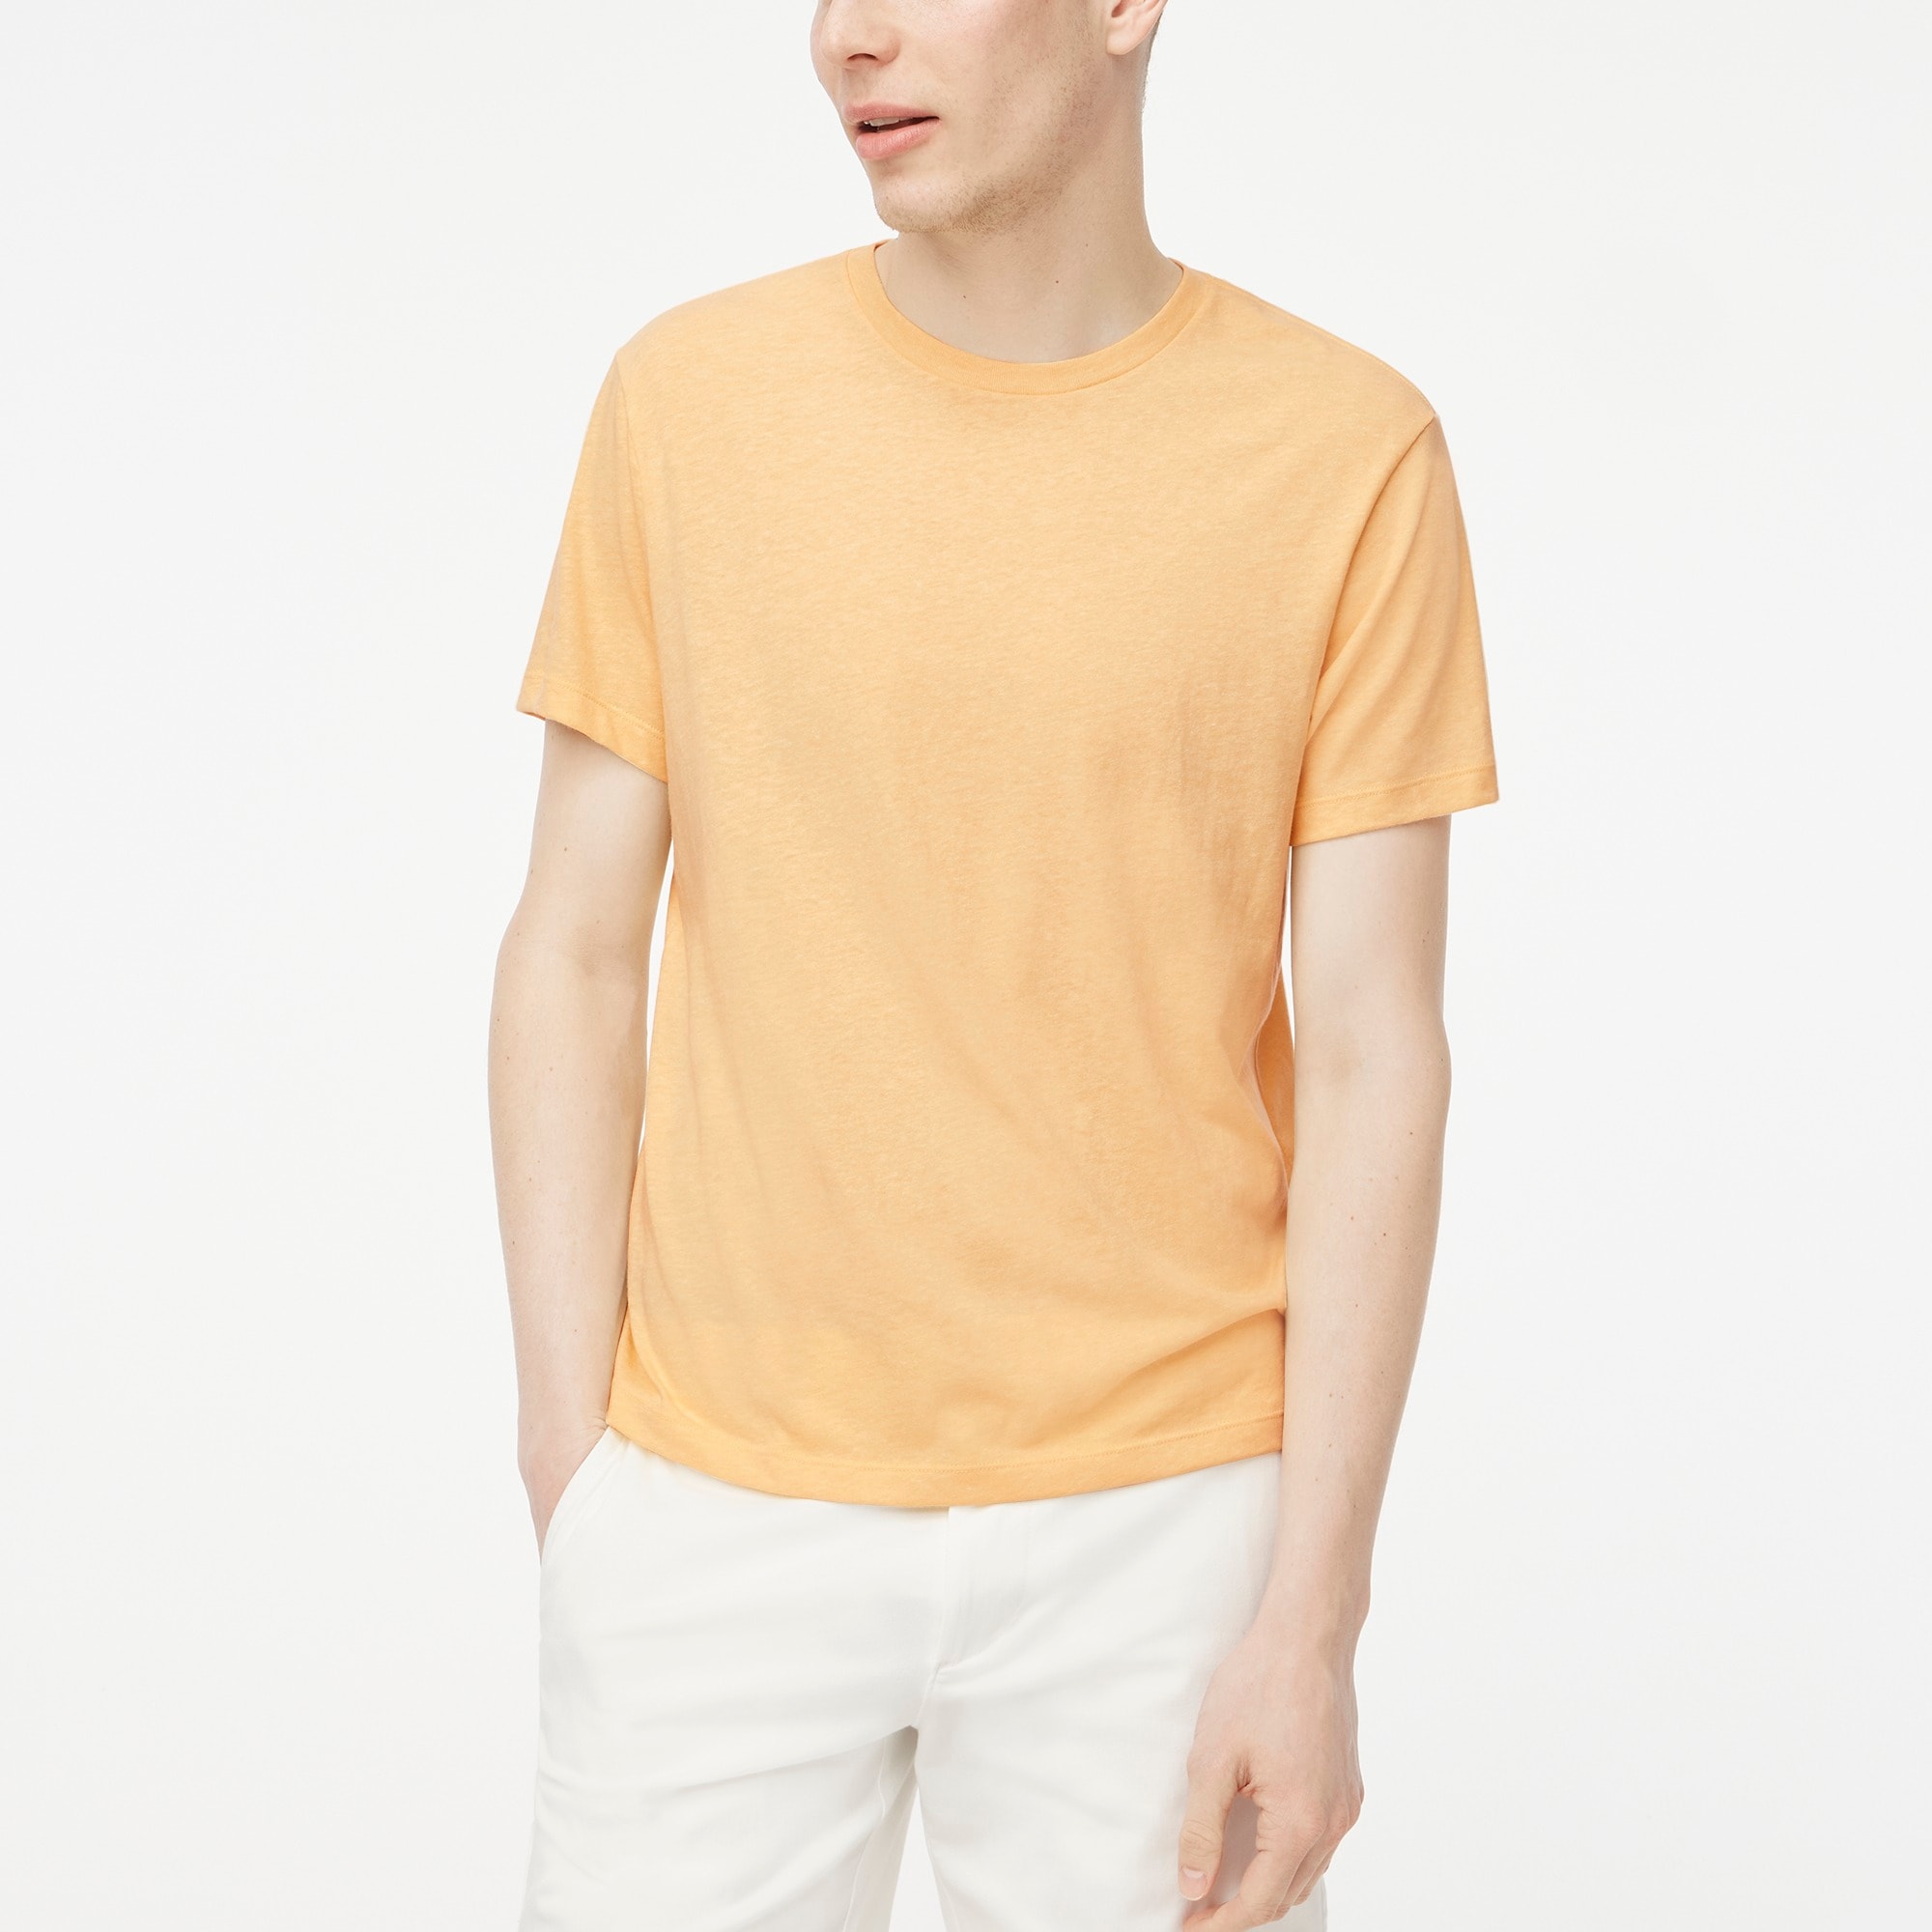  Cotton-blend washed jersey tee